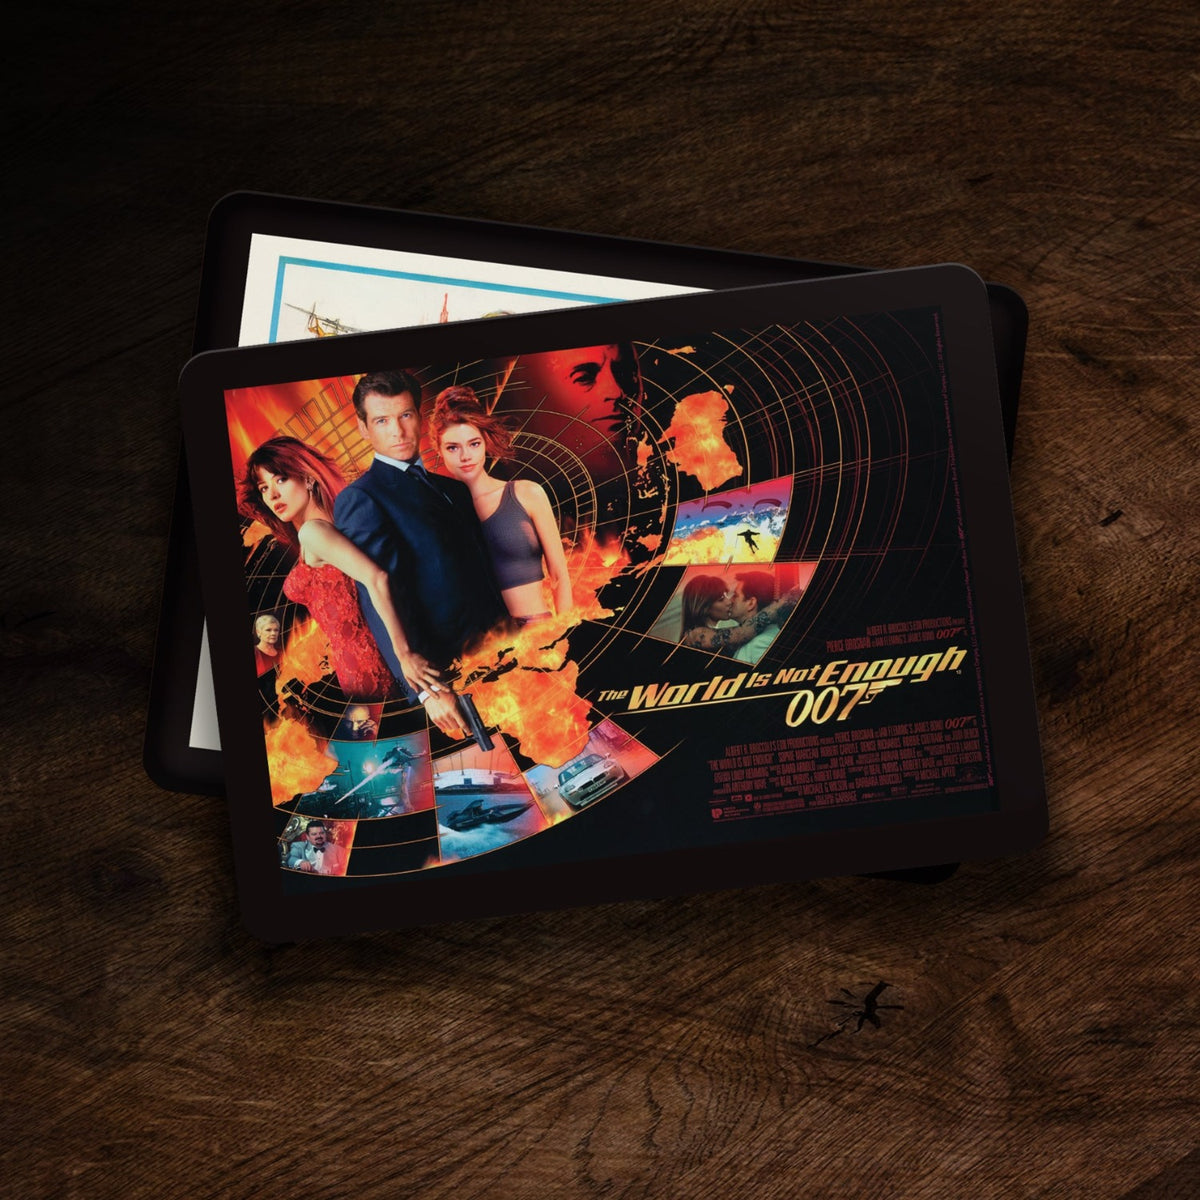 James Bond Placemat - The World Is Not Enough Edition